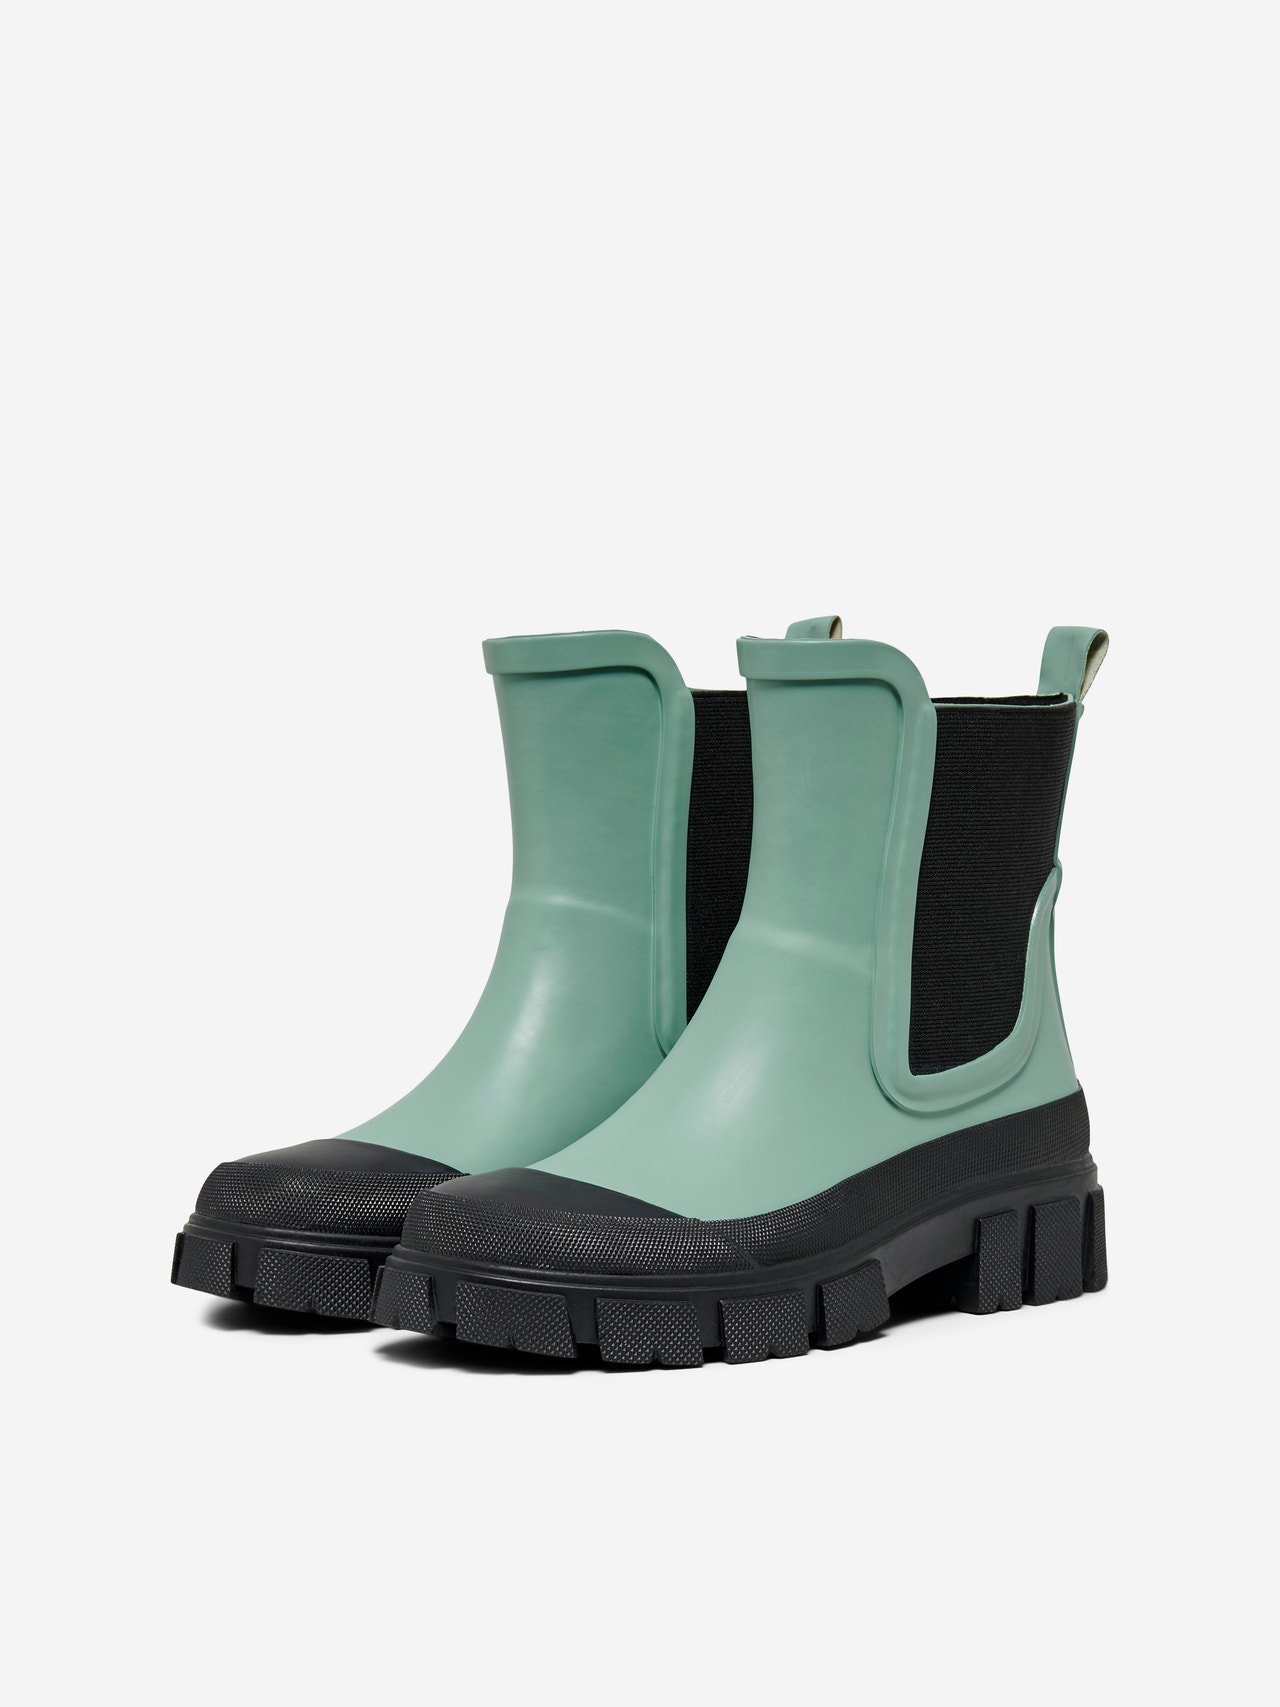 ONLY Round toe Boots -Green Ash - 15288645